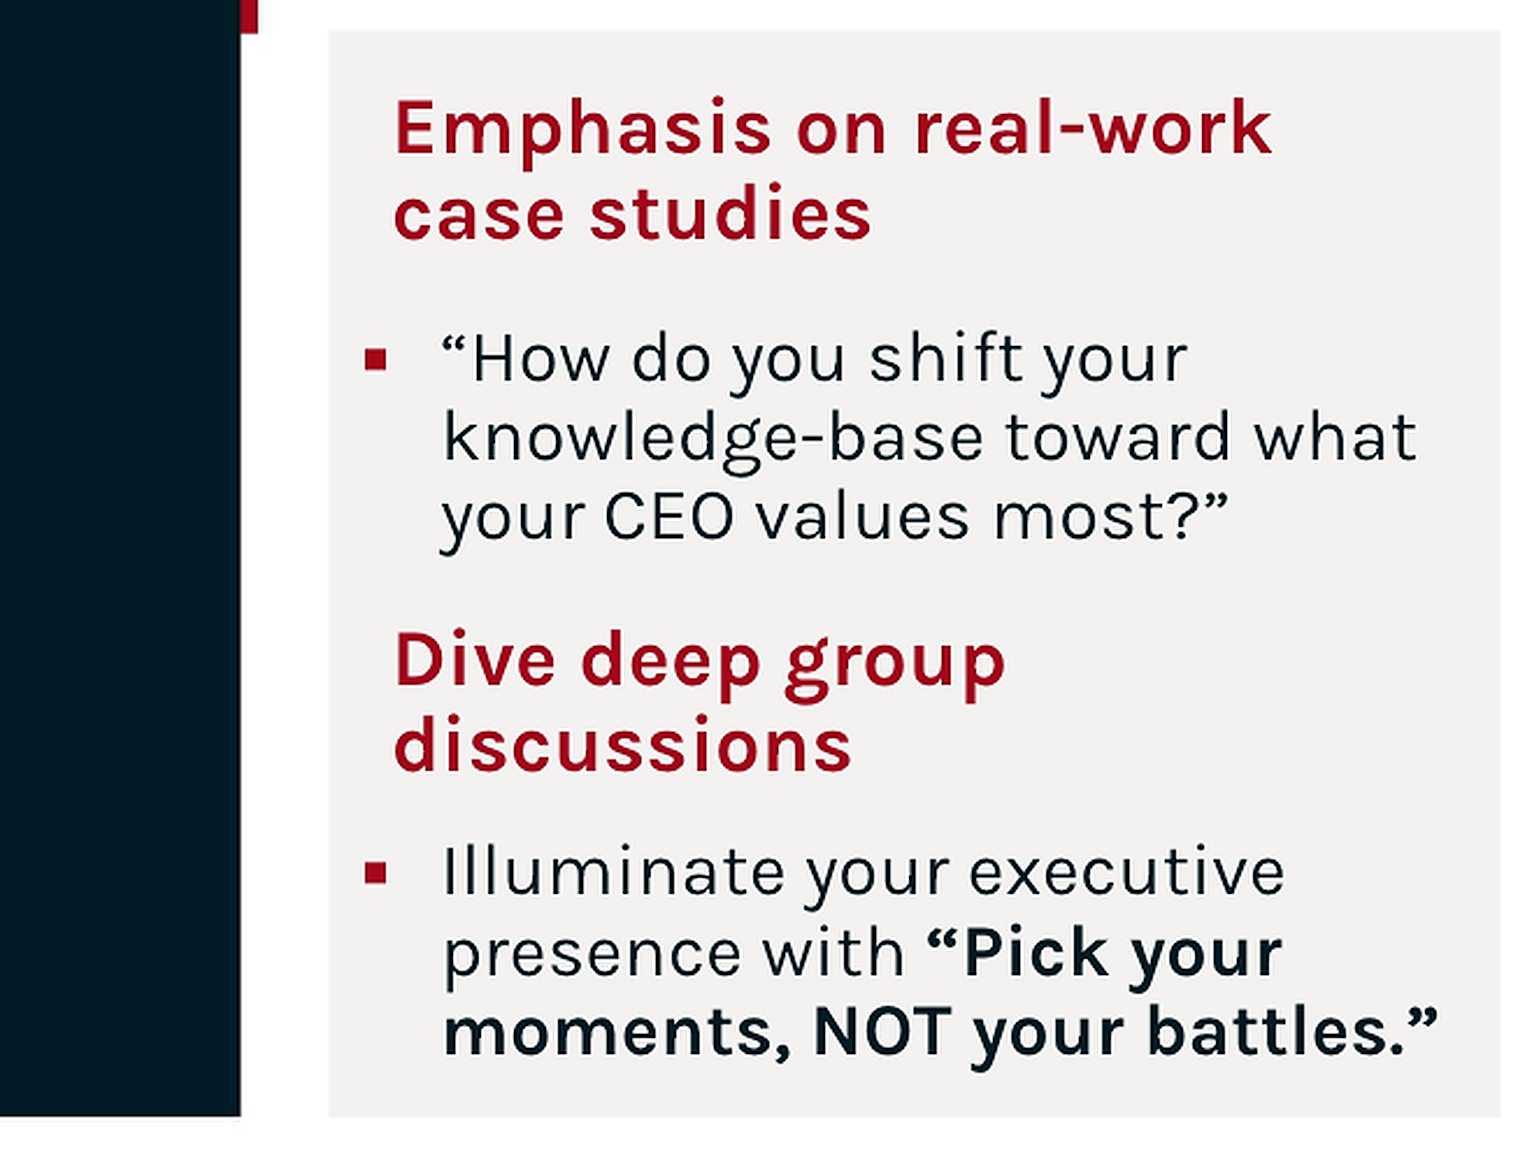 High emphasis on real-work case studies and dive deep group discussions